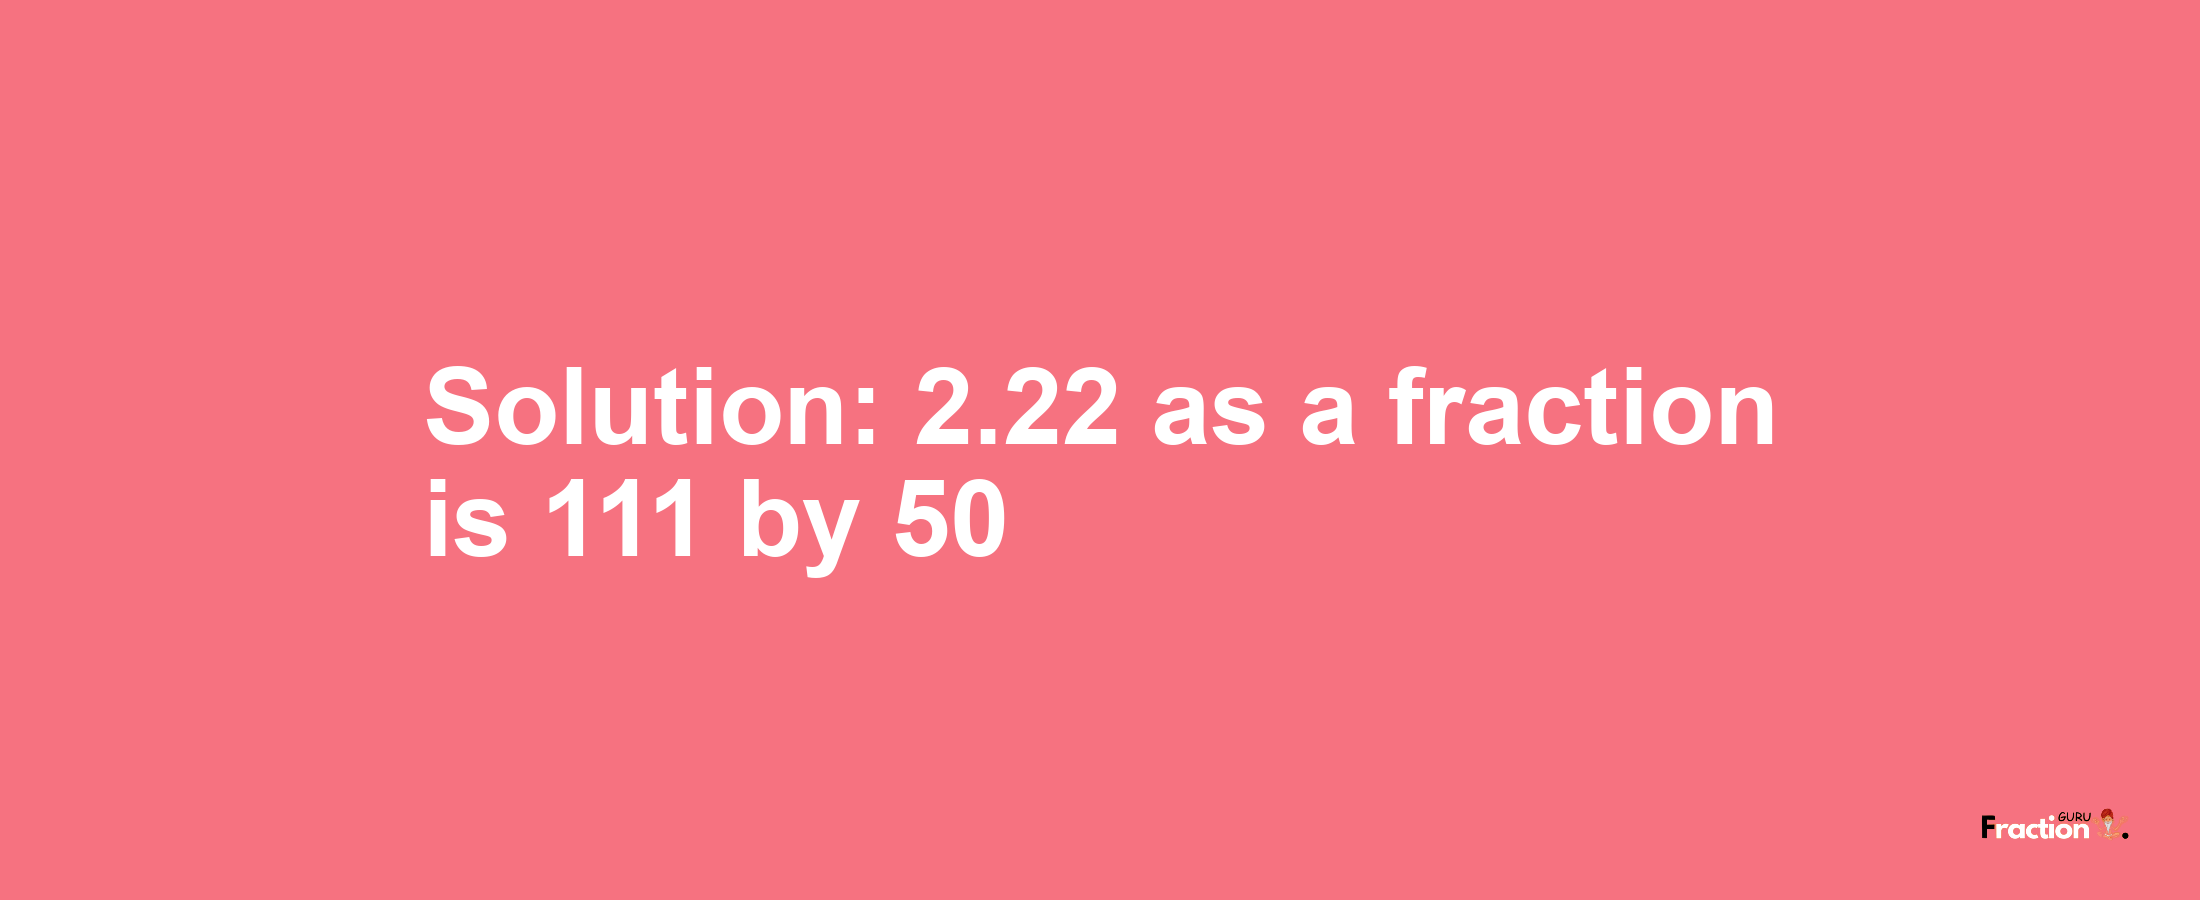 Solution:2.22 as a fraction is 111/50